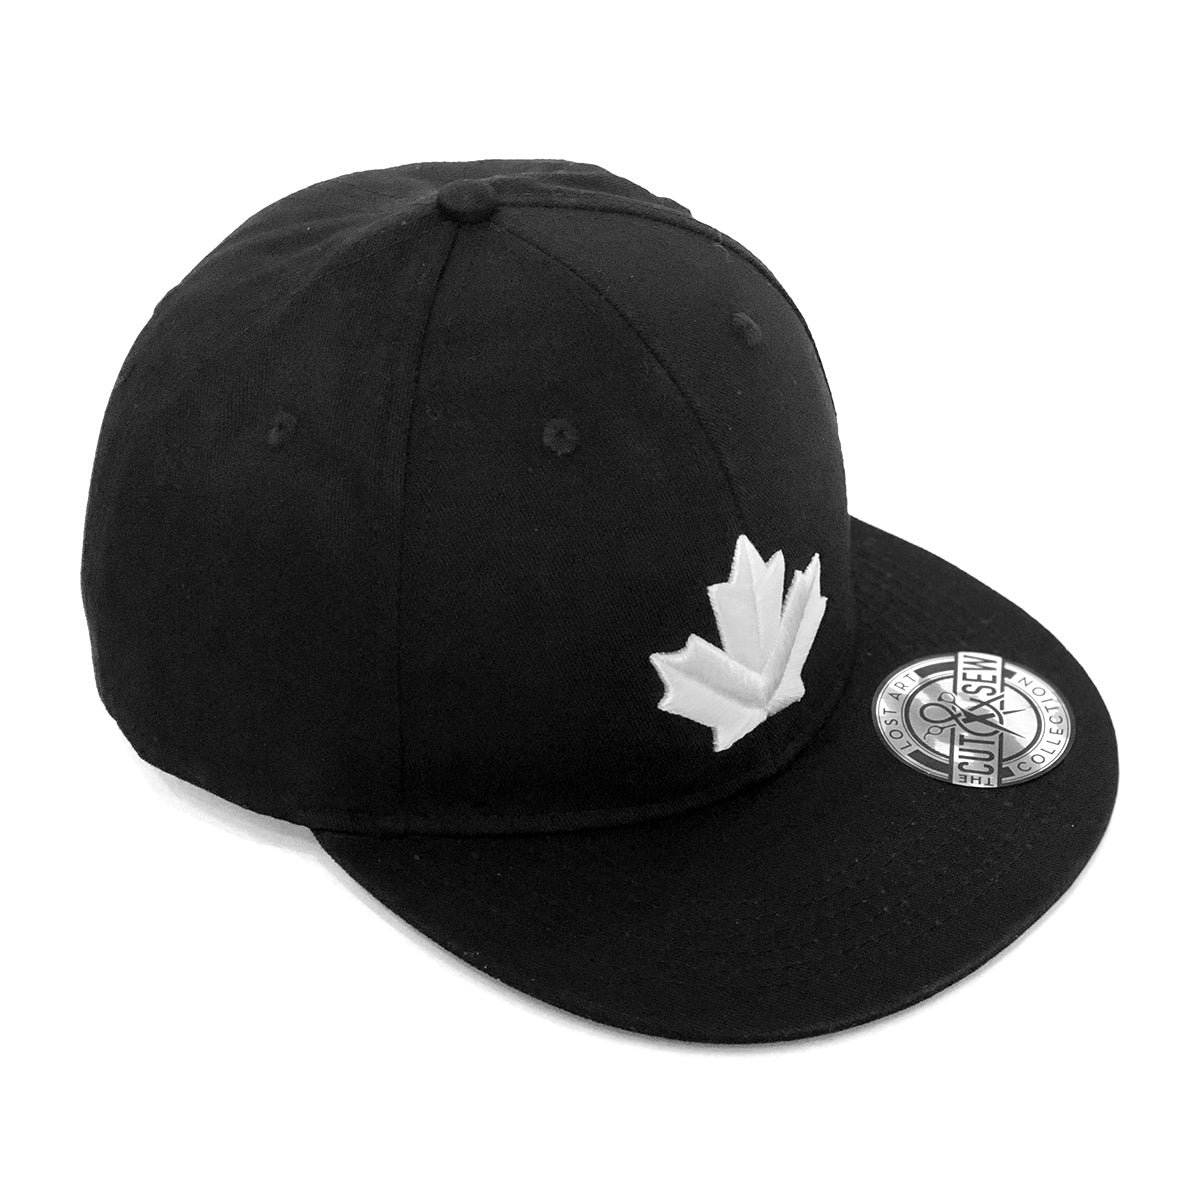 Lost Art Canada - white maple leaf black snapback hat front view